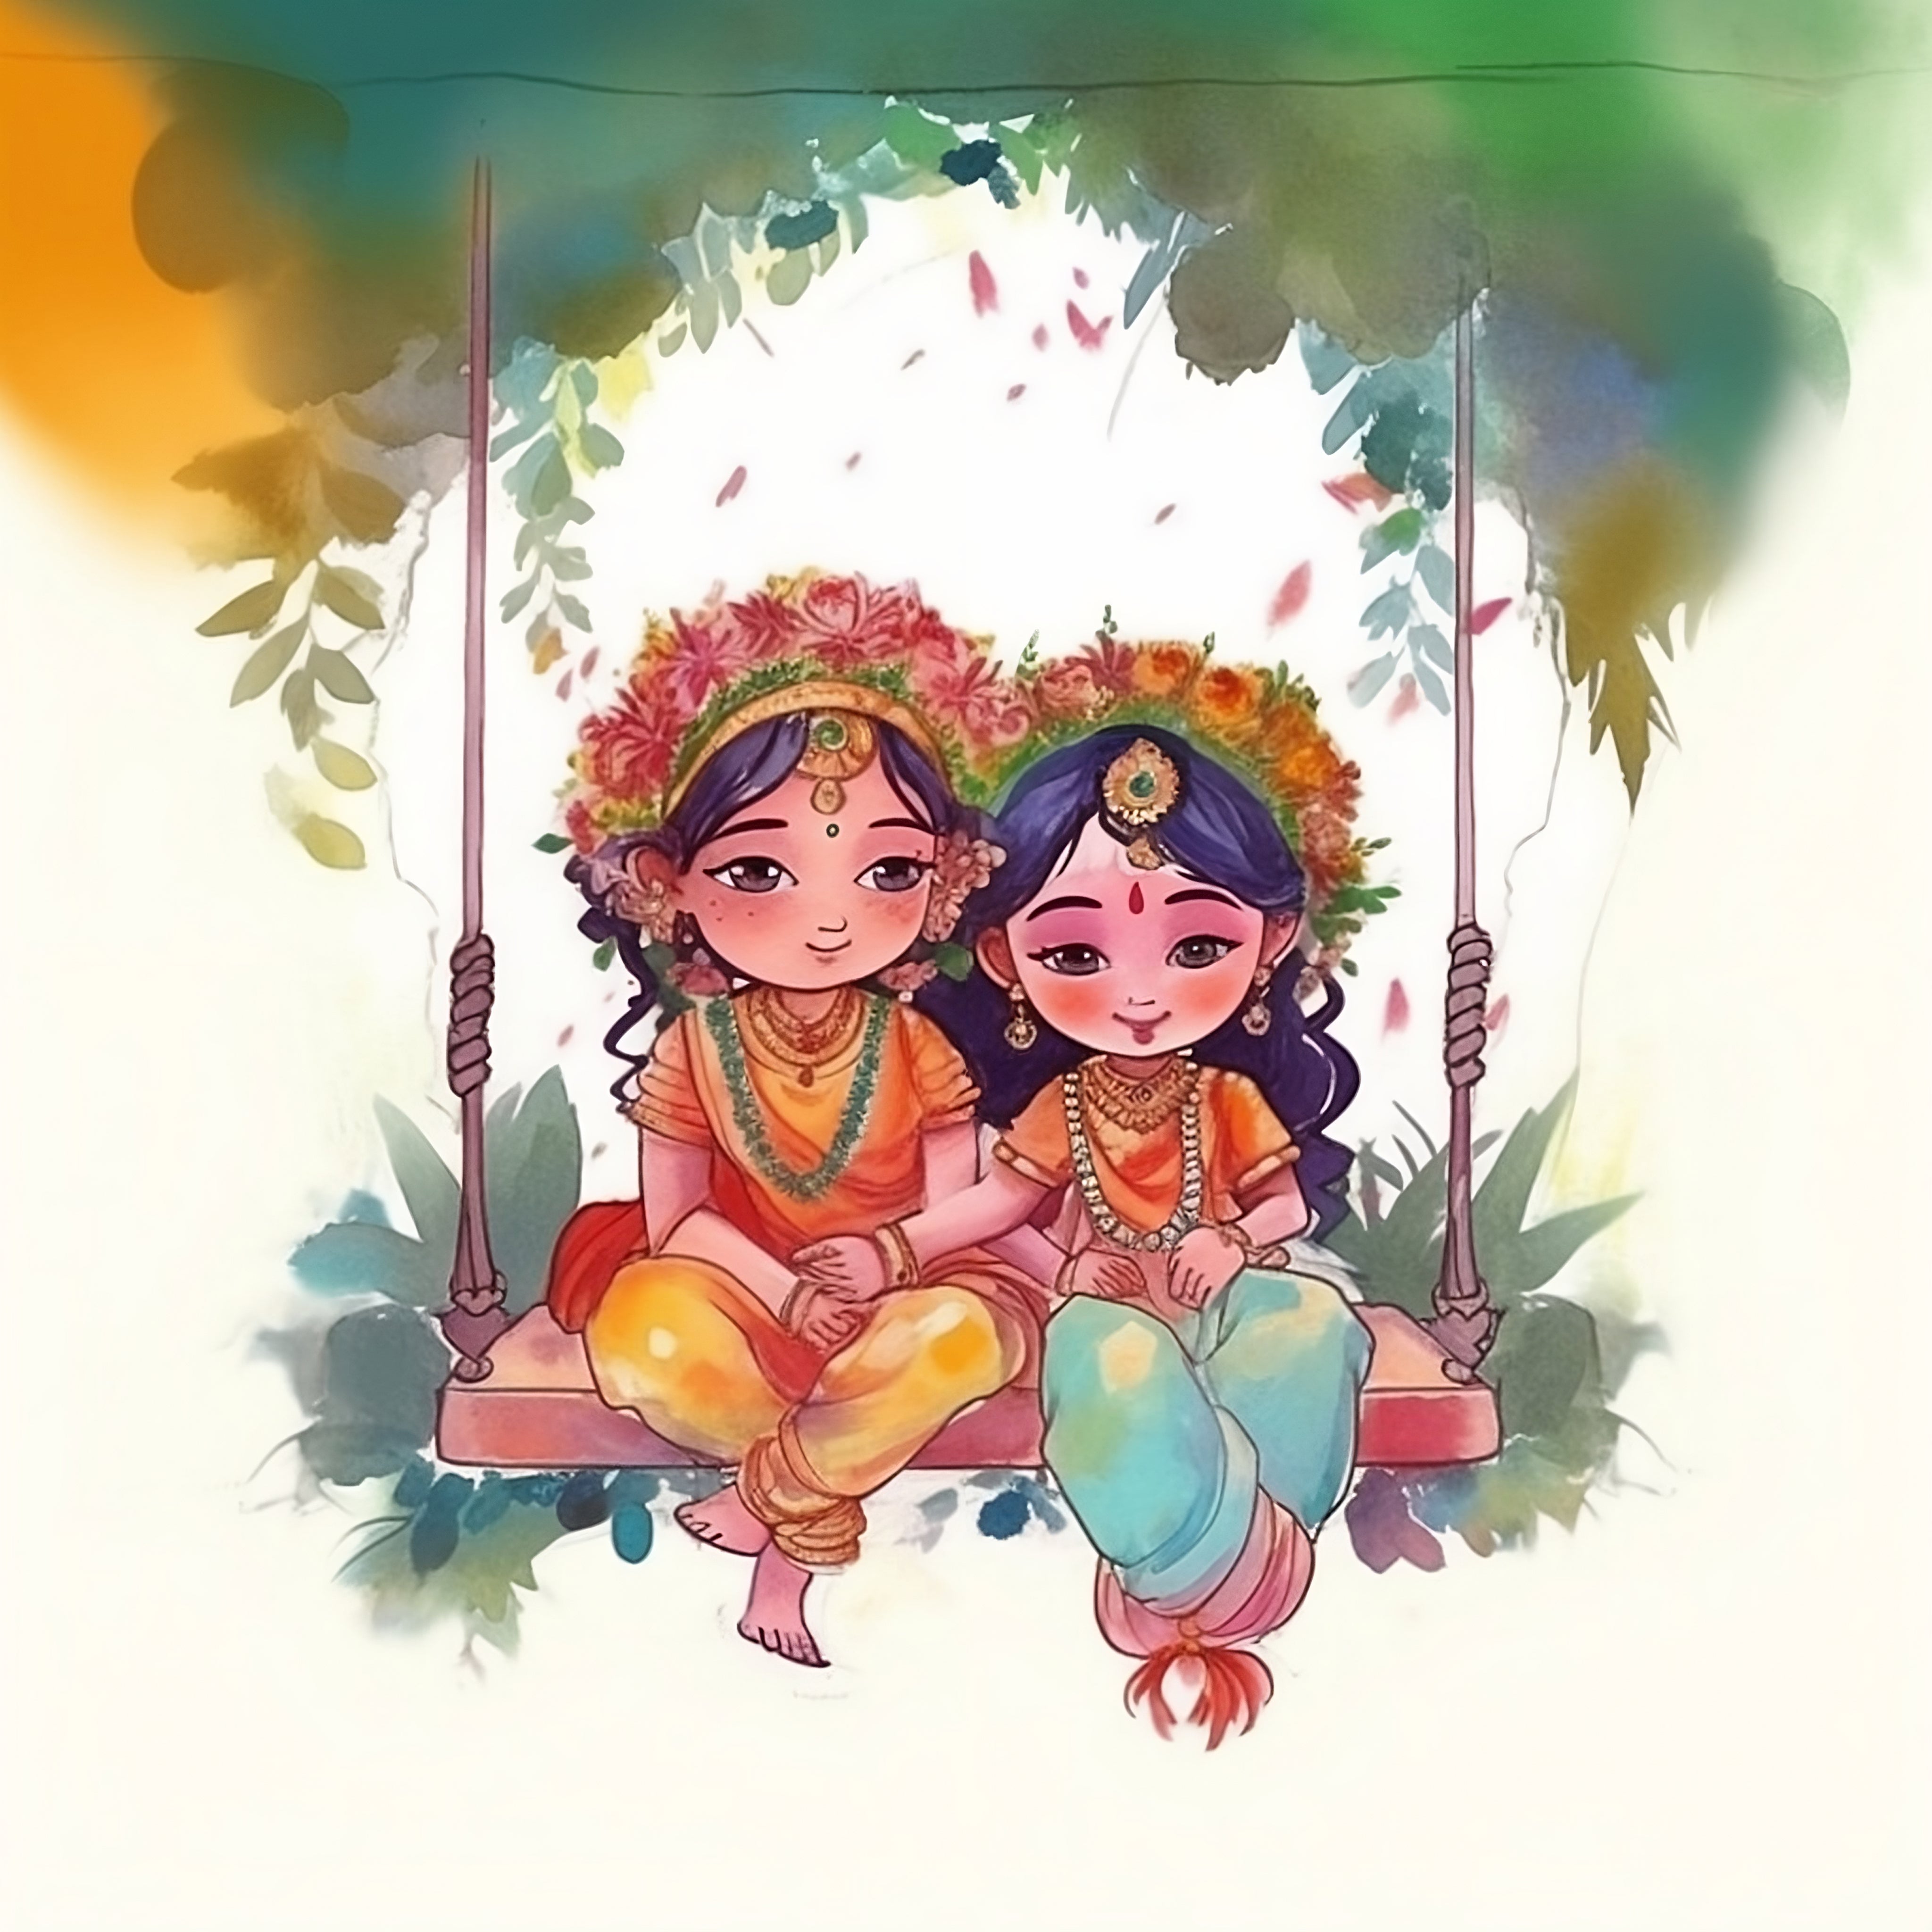 Blessed Love of Baby Radha Krishna on Floral Swing AnimeStyle Waterco